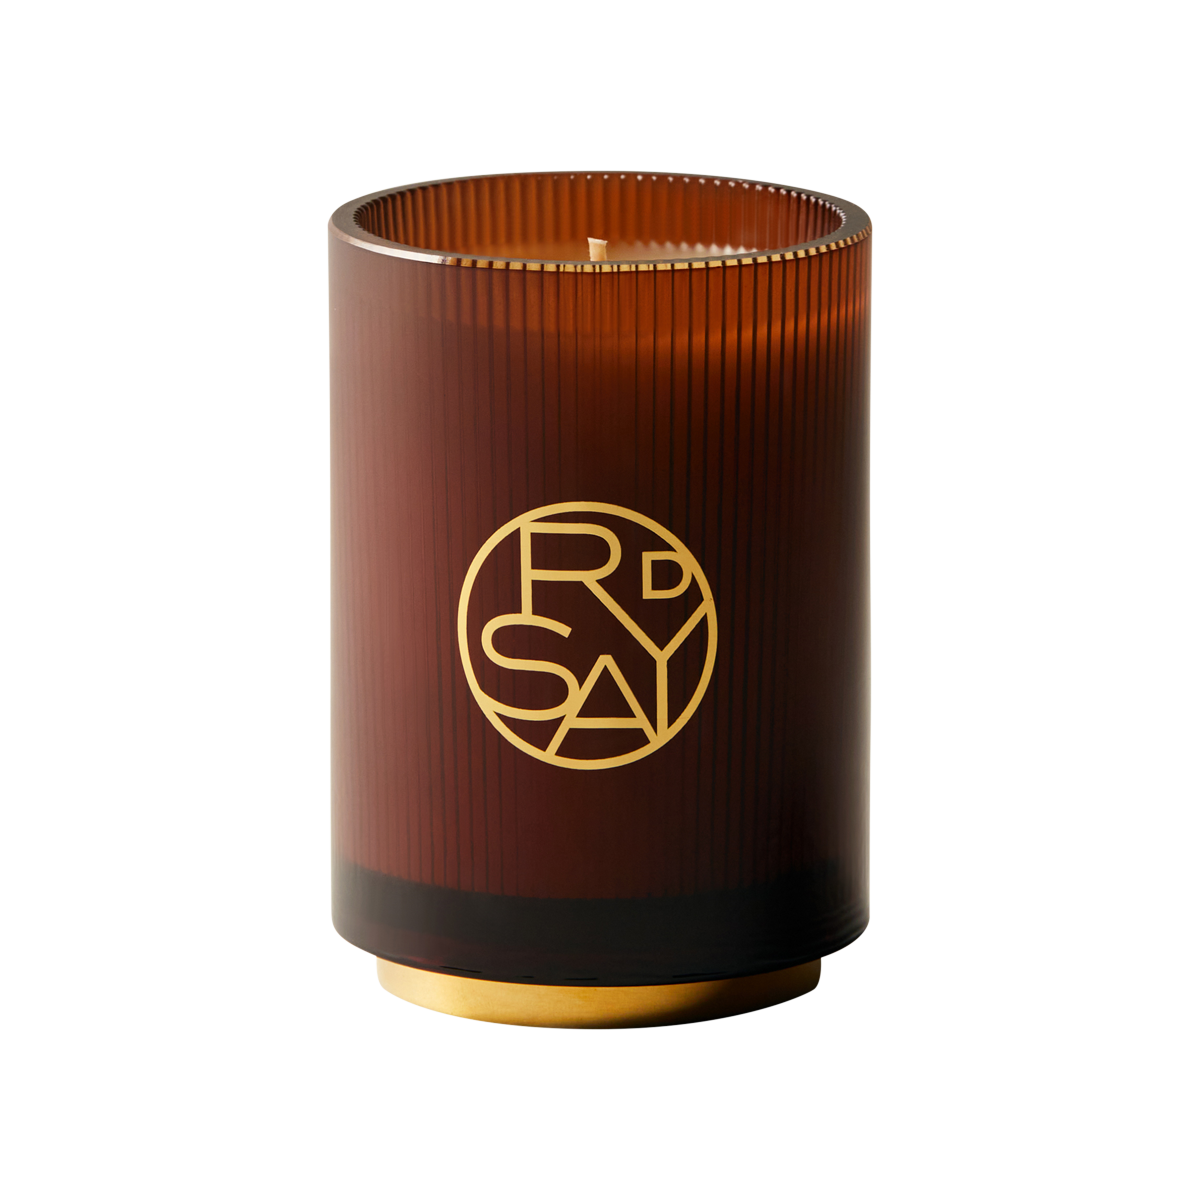 D'Orsay - Scented Candle 02:45 Enfin Seuls